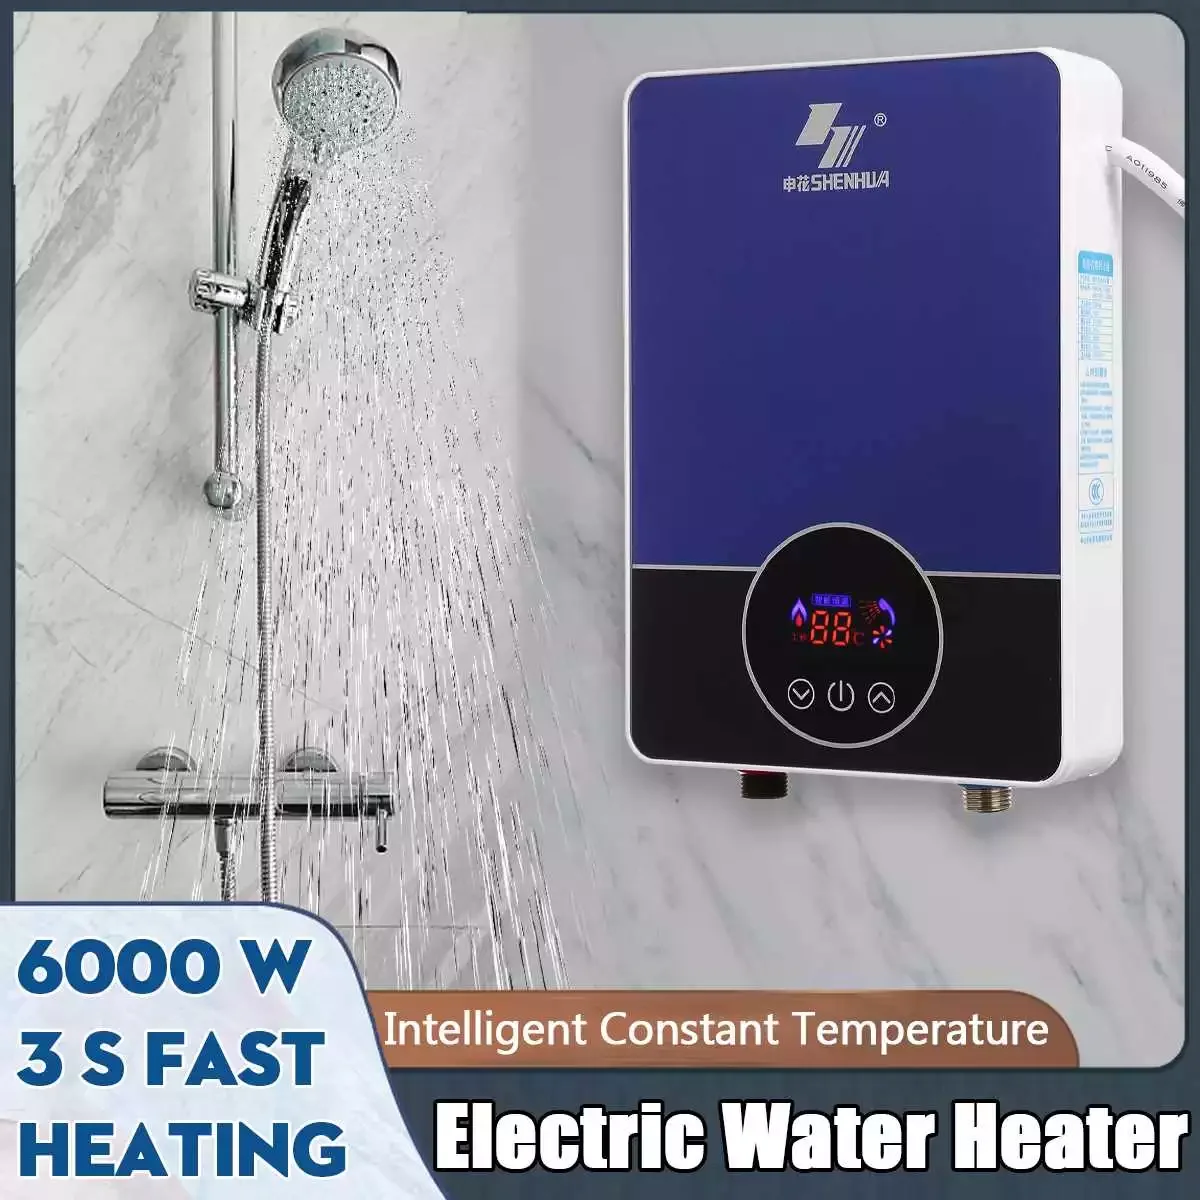 6000W Smart Electric Water Heater Remote Control Instantaneous Tankless Water Heater Kitchen Bathroom Shower Water Fast Heating